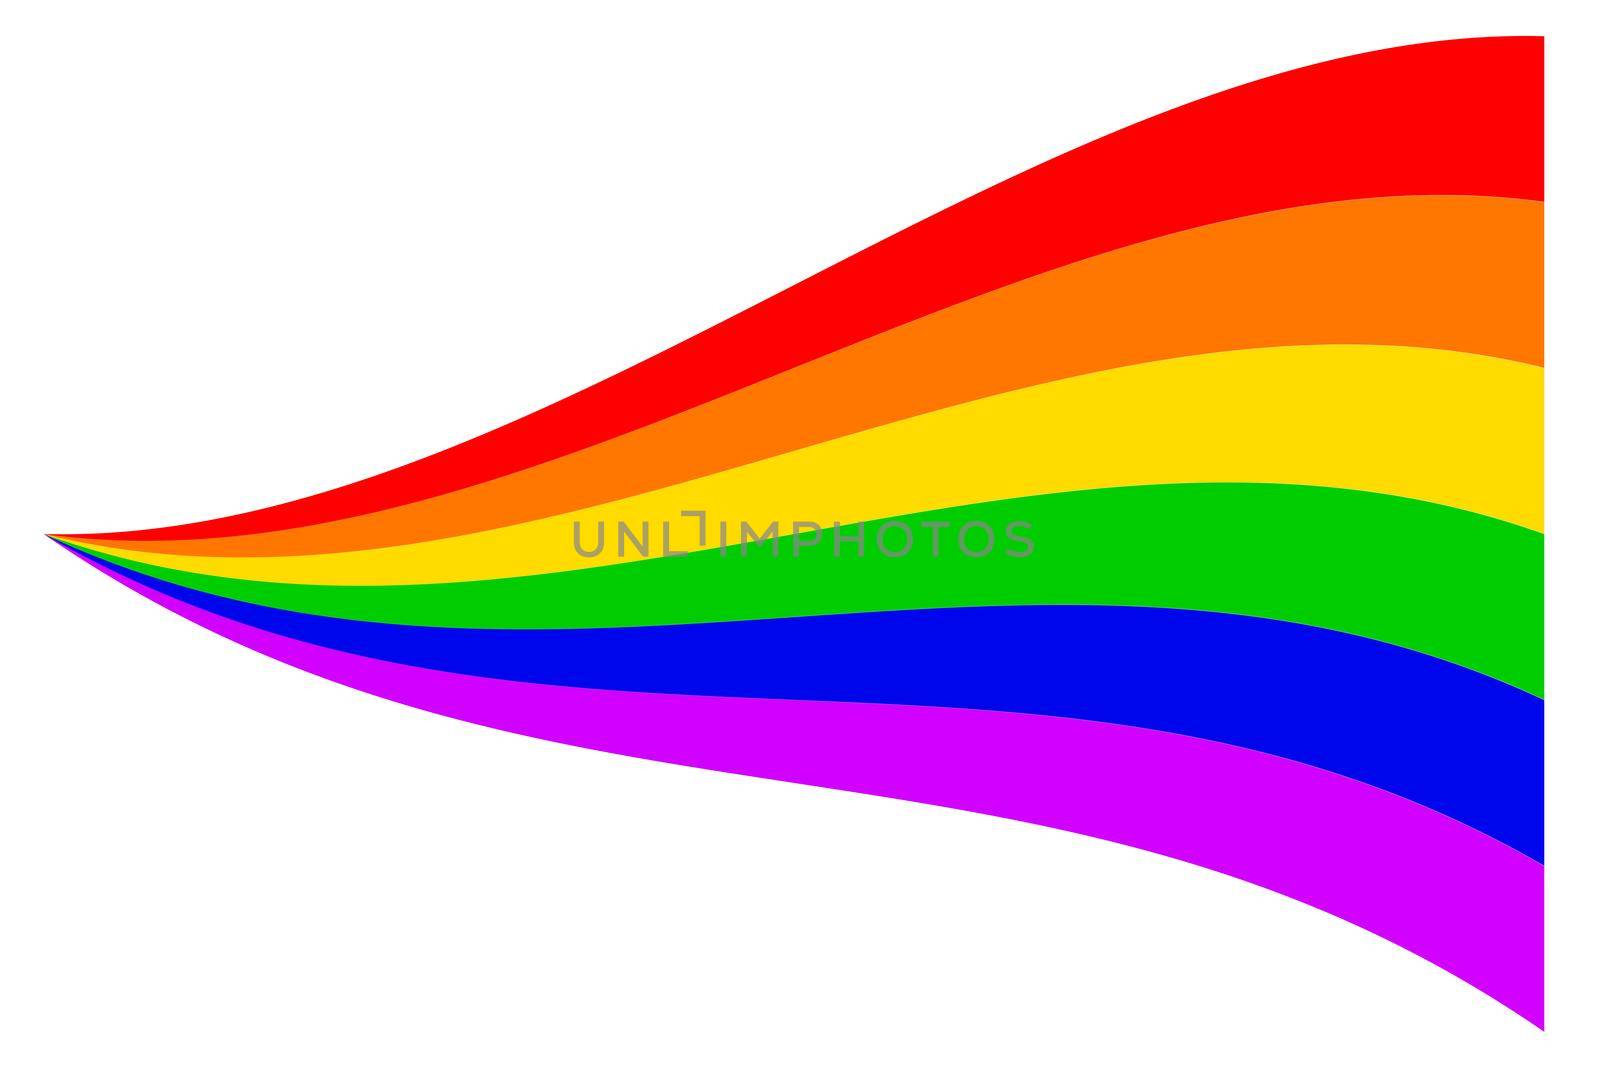 The Gay Trangender background in the traditional rainbow colors